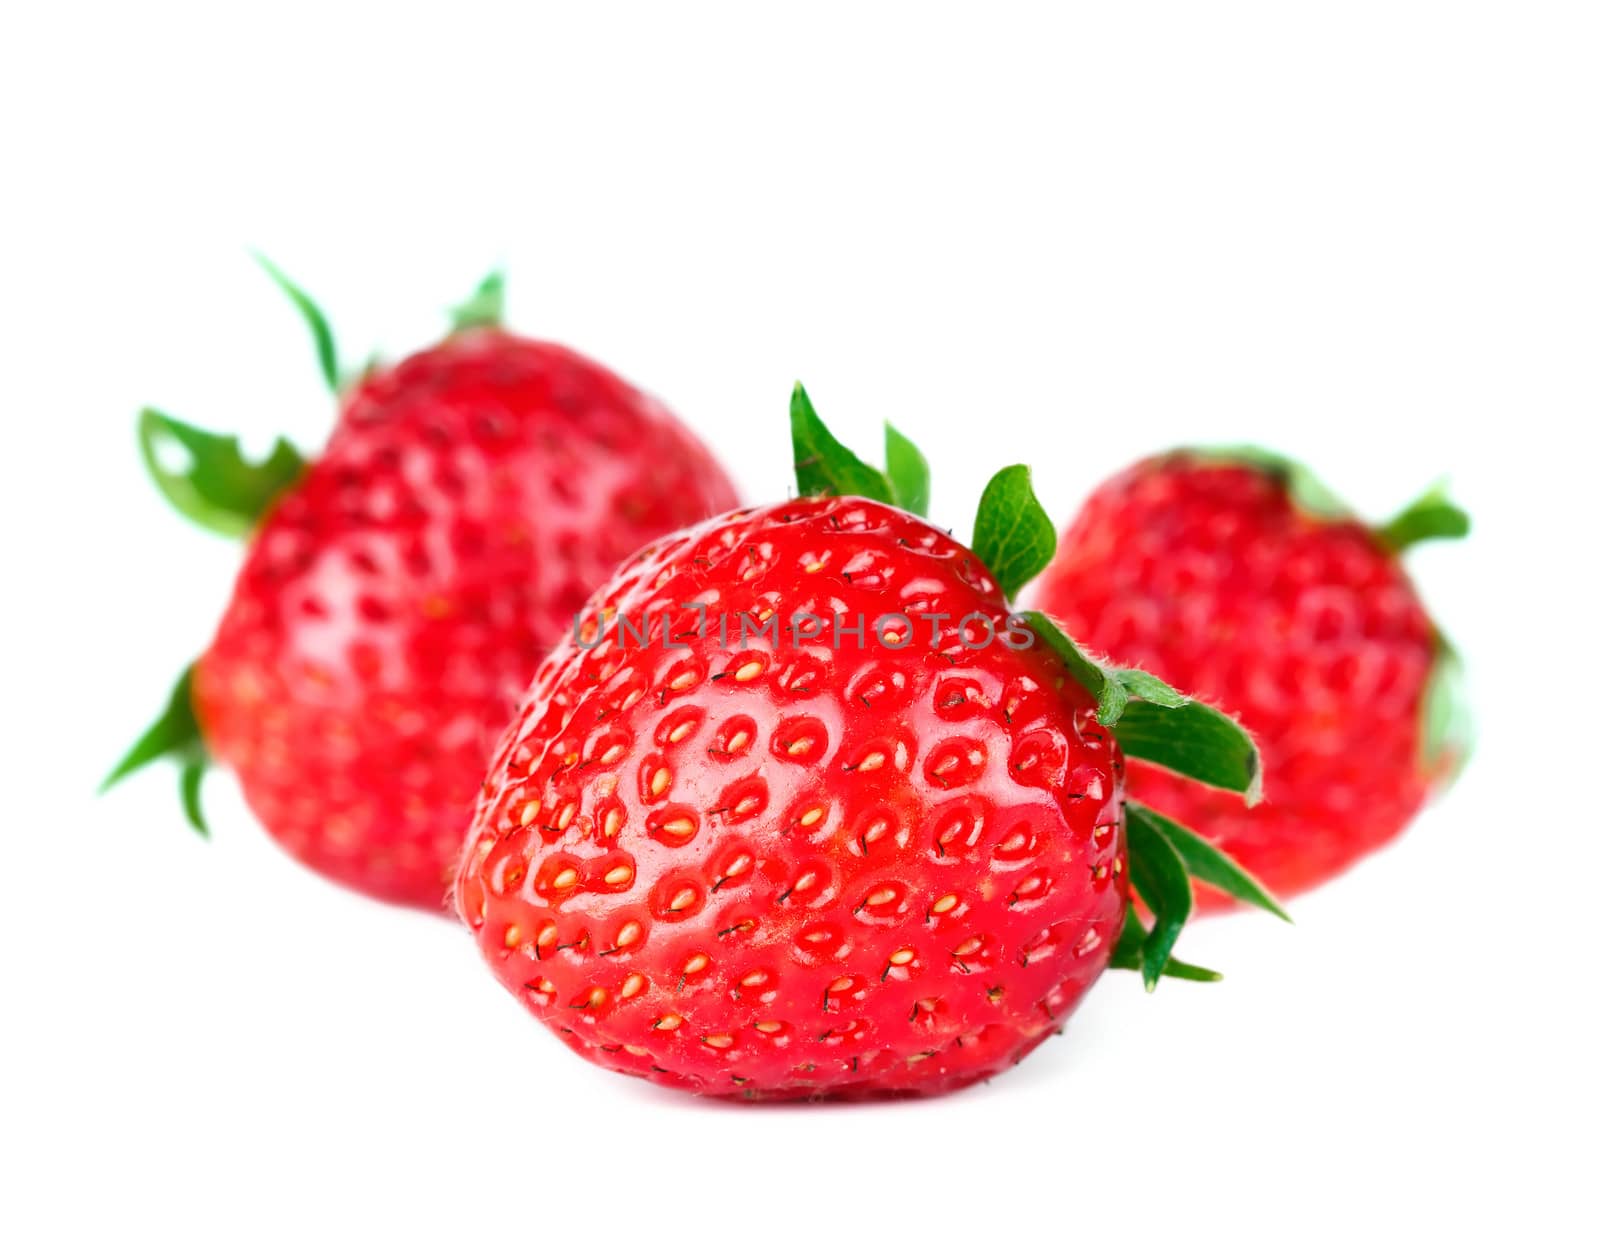 Beautiful ripe red fresh appetizing strawberries with leaves. Isolated on a white background.